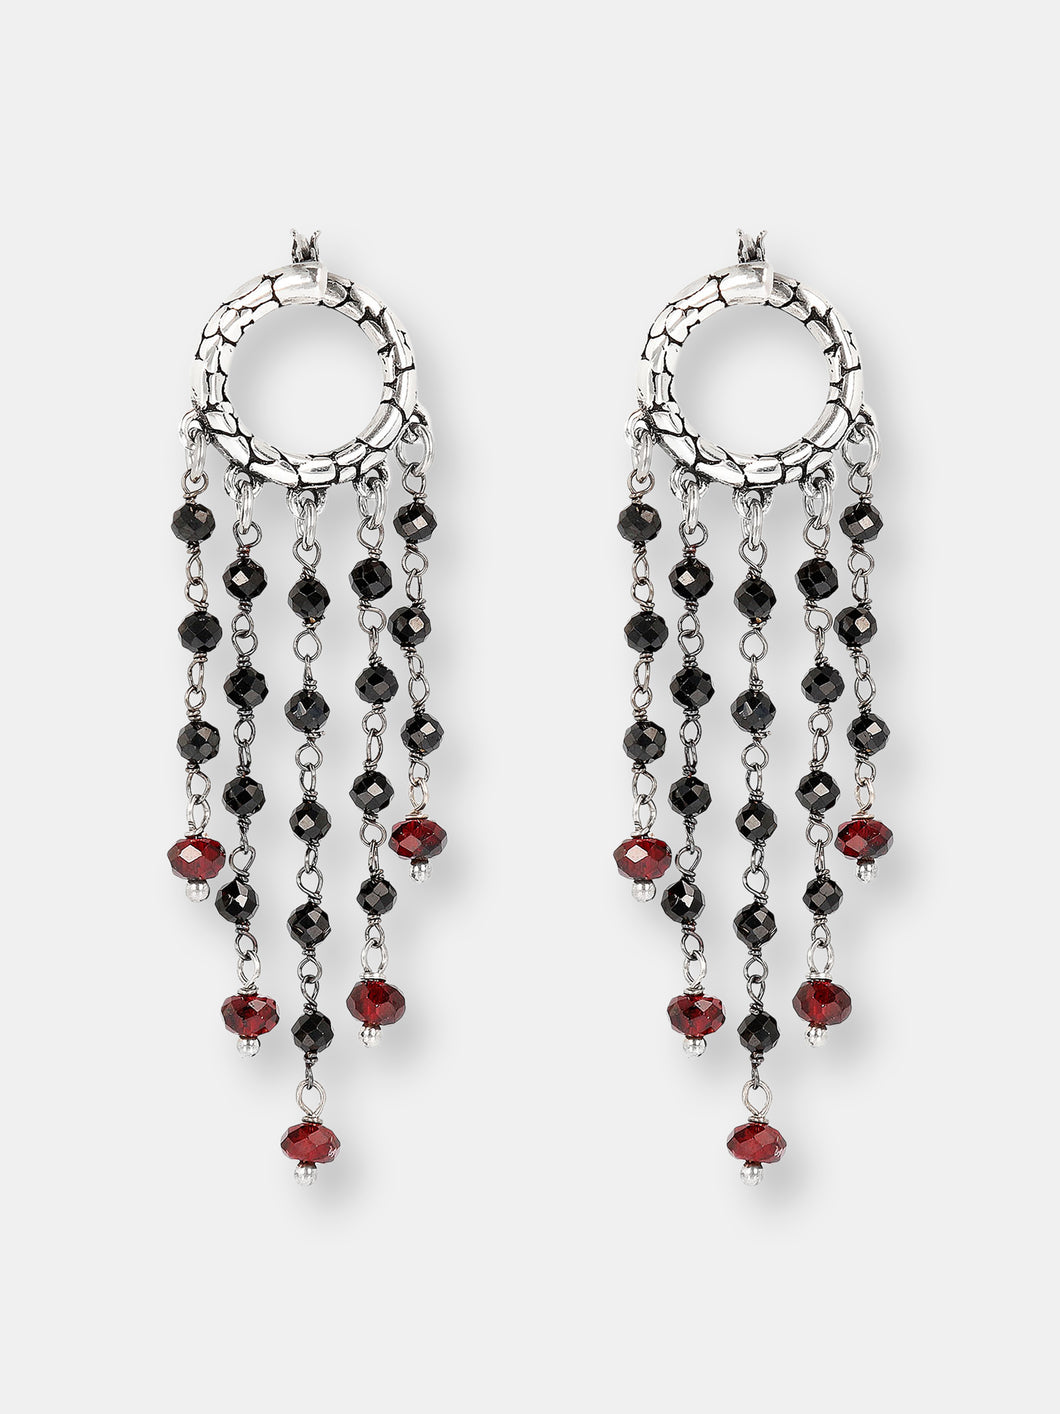 Chandelier Earrings with Black Spinel and Garnet